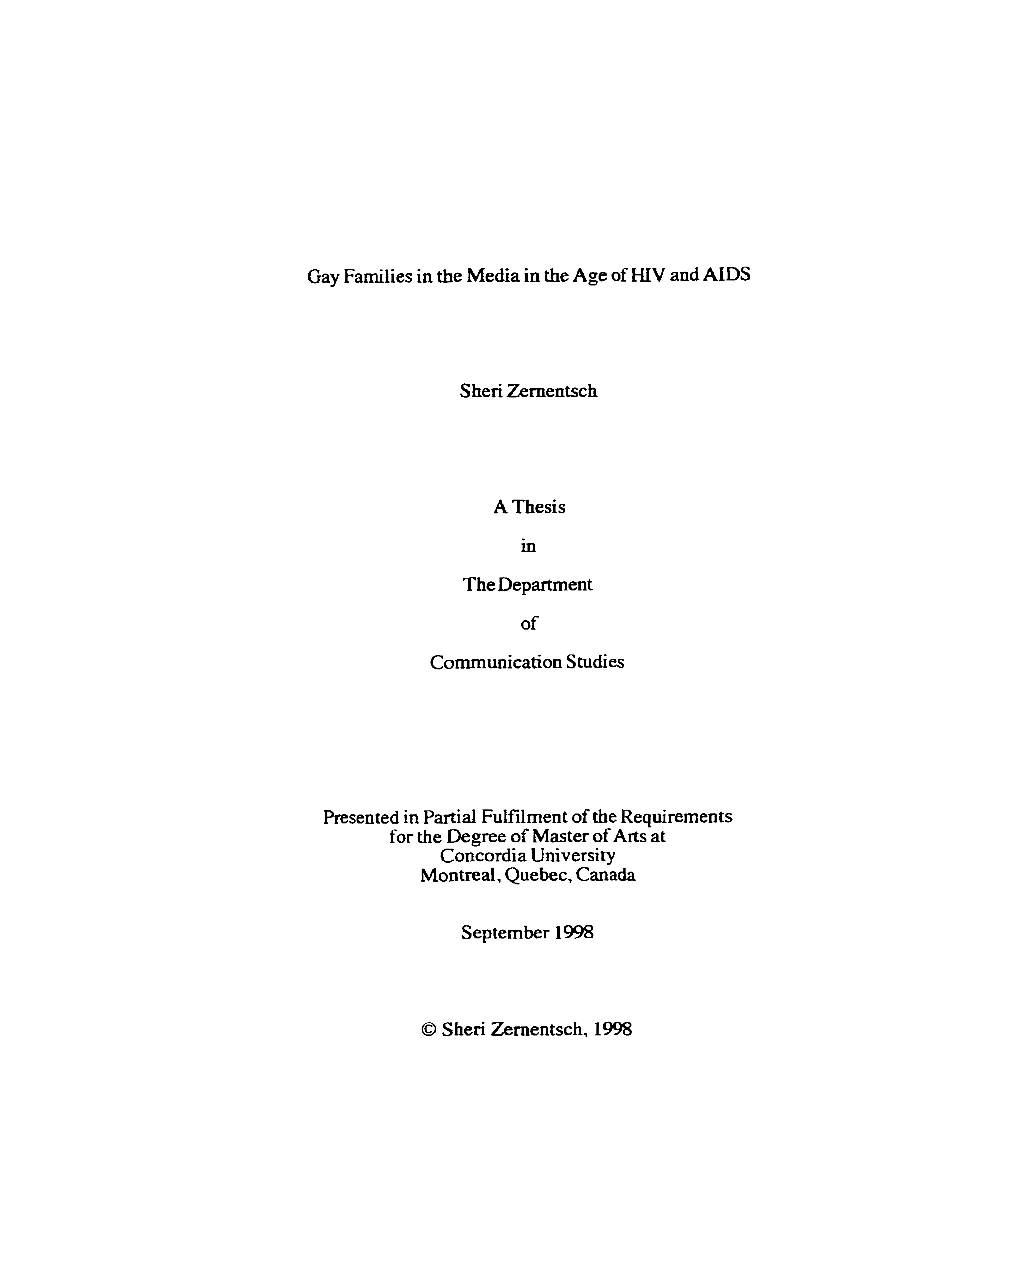 A Thesis Presented in Partial Fulfilmen T of the Requiremen Ts